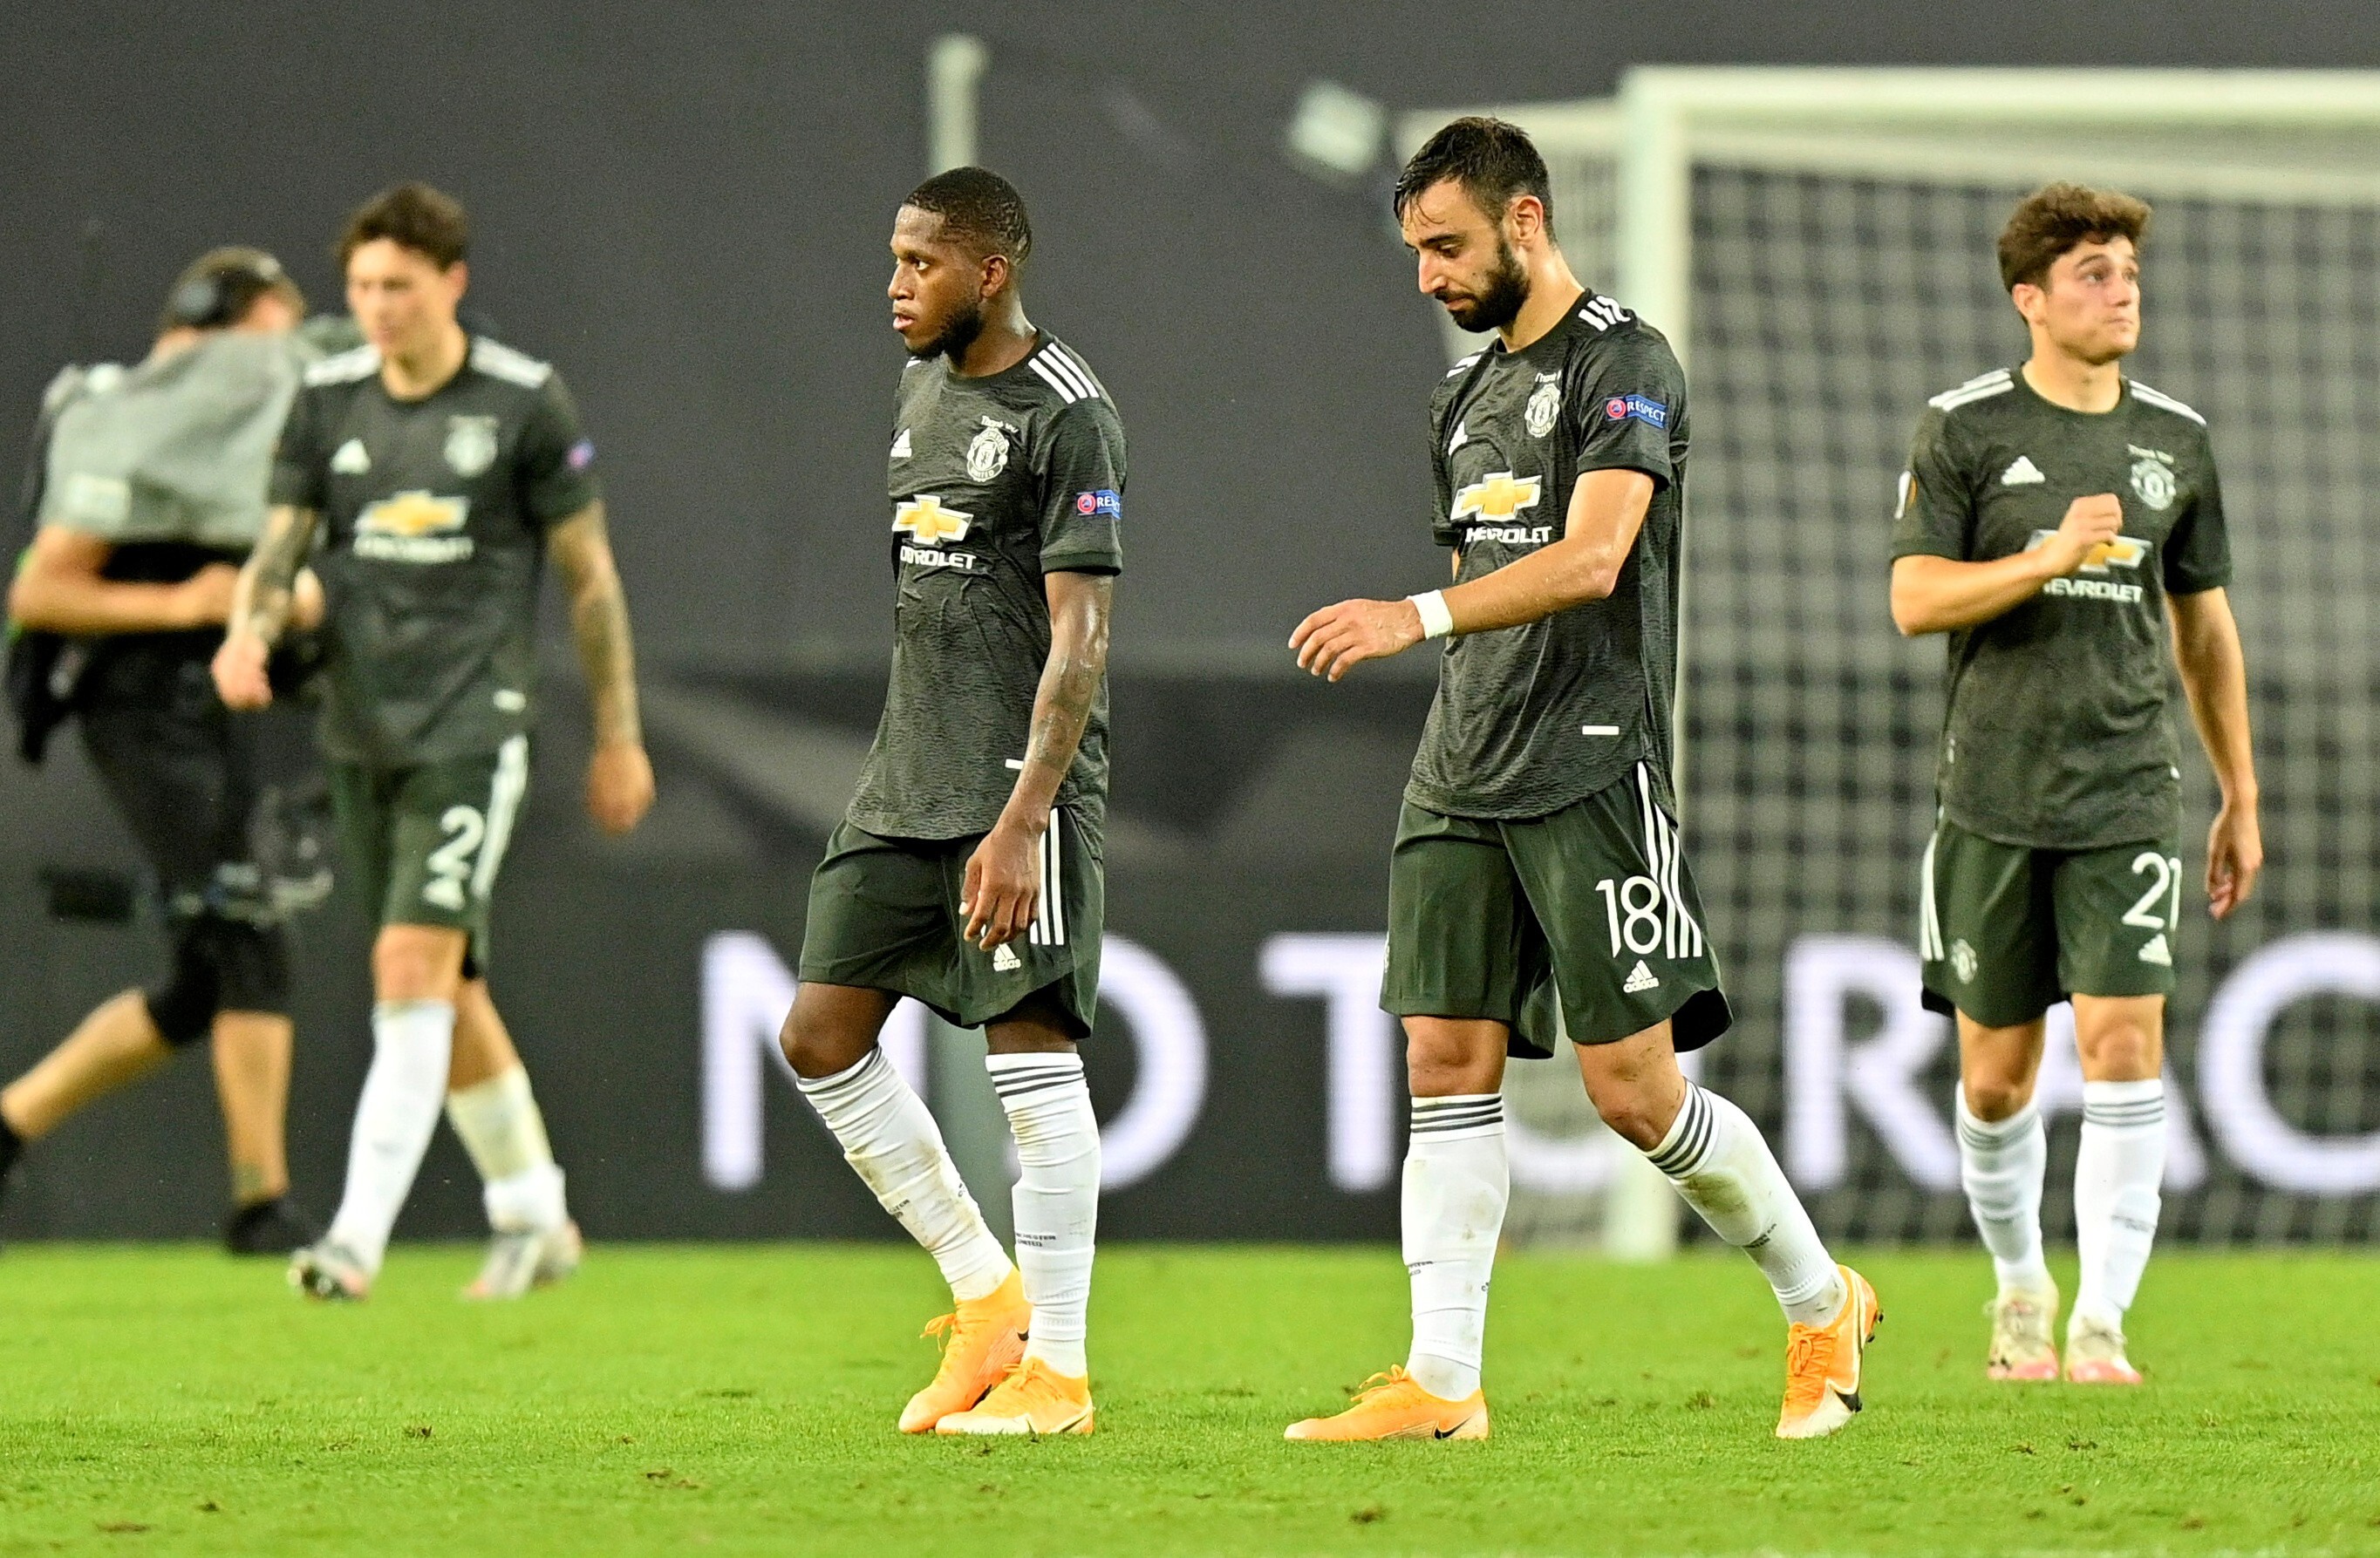 Dejected Manchester players leave the pitch after their Europa League loss to Sevilla. Photo: Reuters